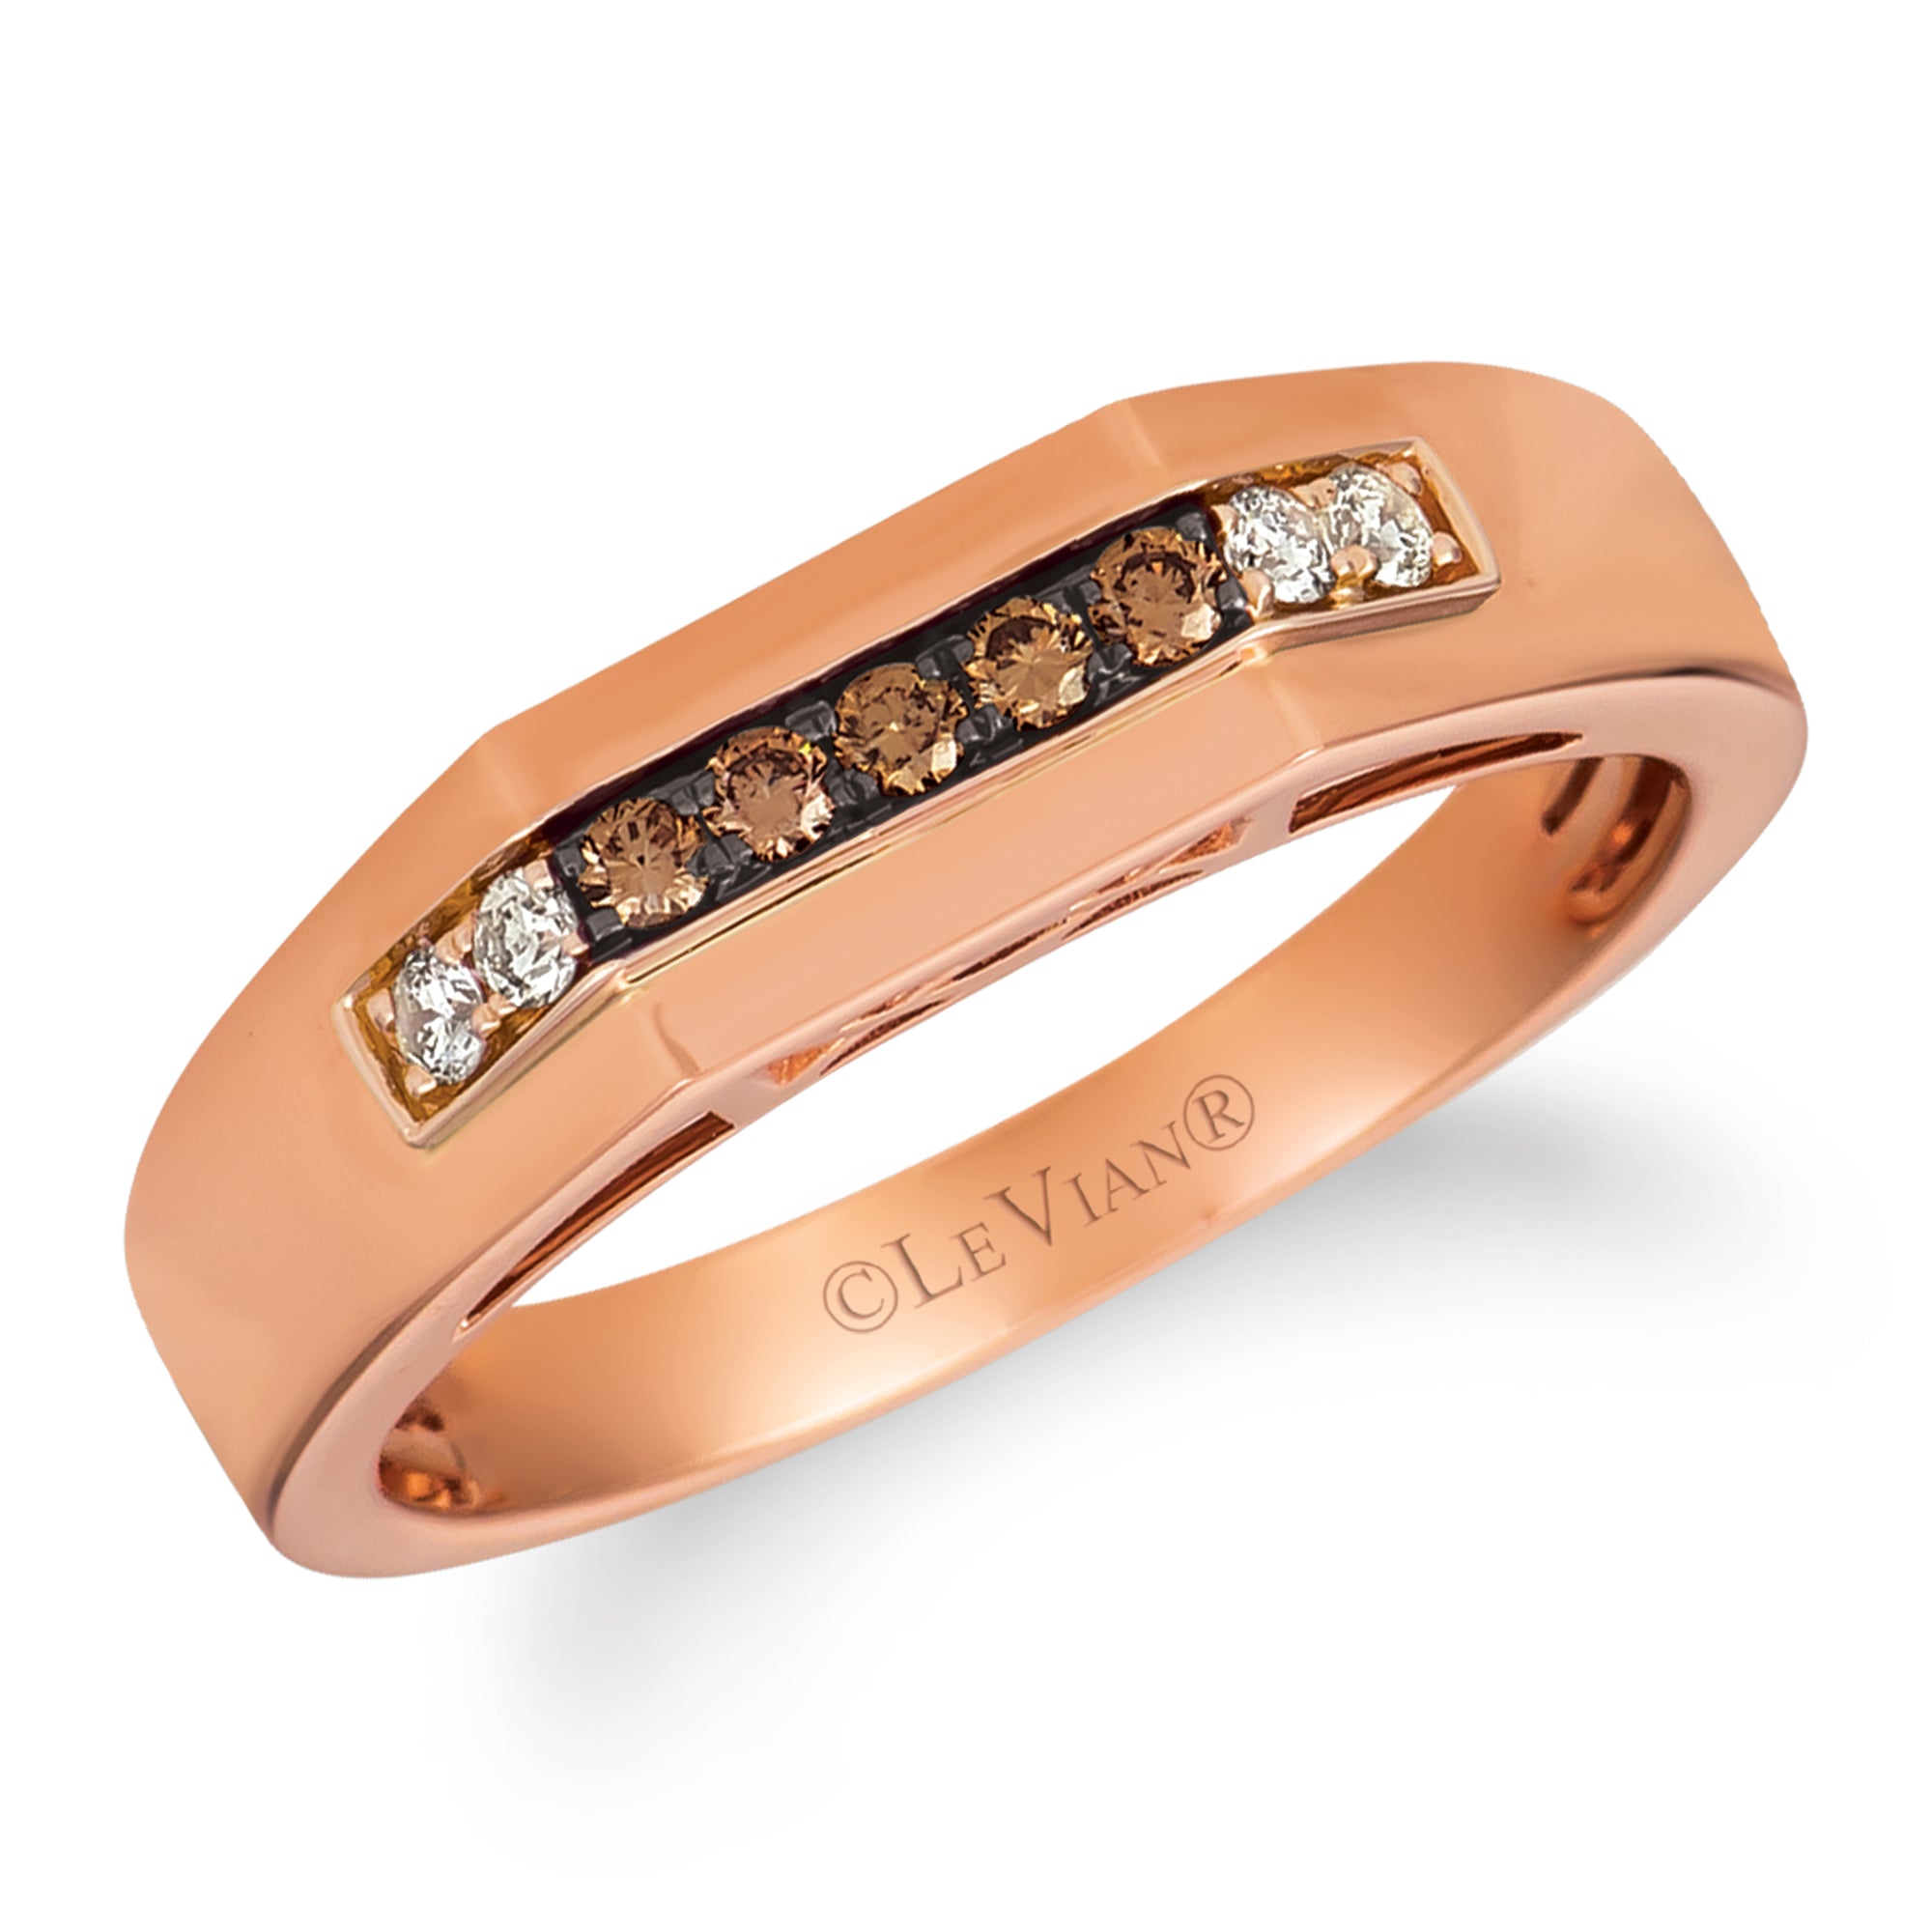 Le Vian Creme Brulee Ring featuring Chocolate Diamonds, Nude Diamonds set in 14K Strawberry Gold